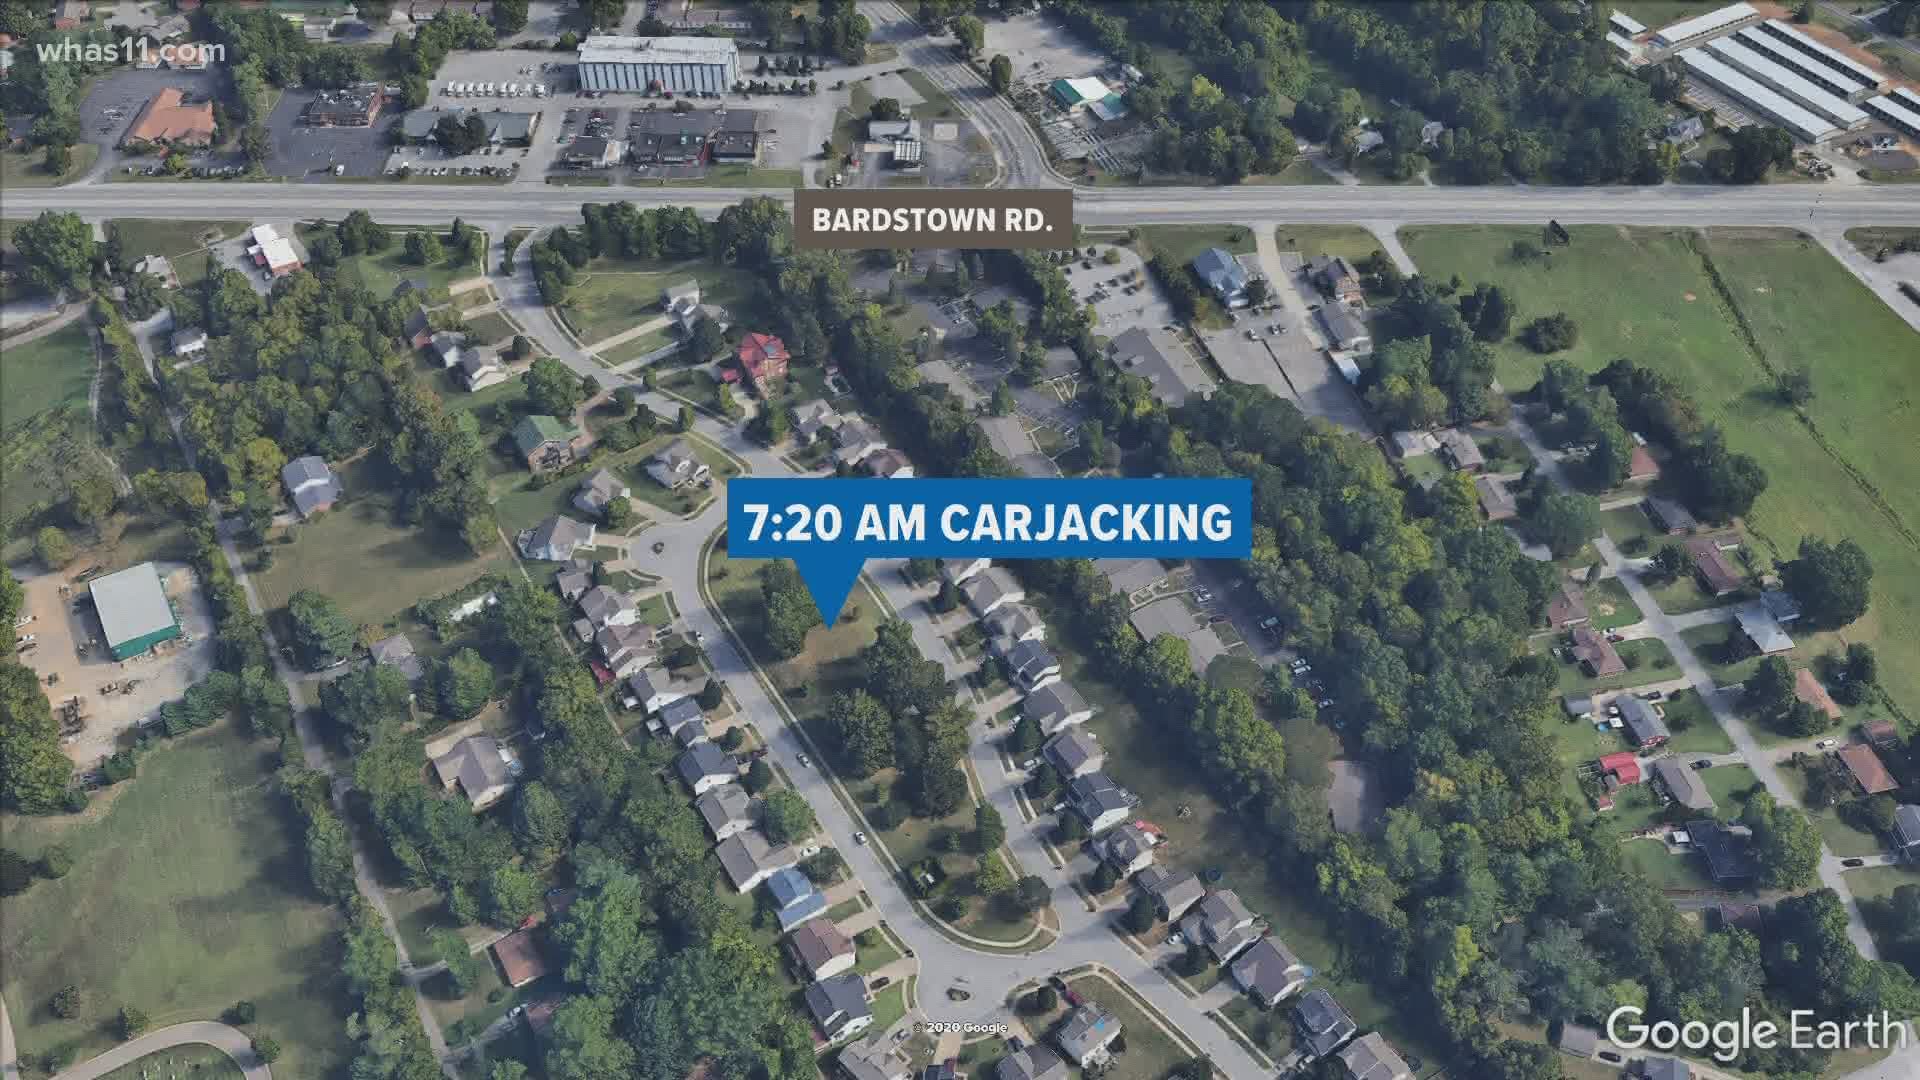 2 arrested following carjacking, robbery in Louisville | www.bagssaleusa.com/product-category/scarves/